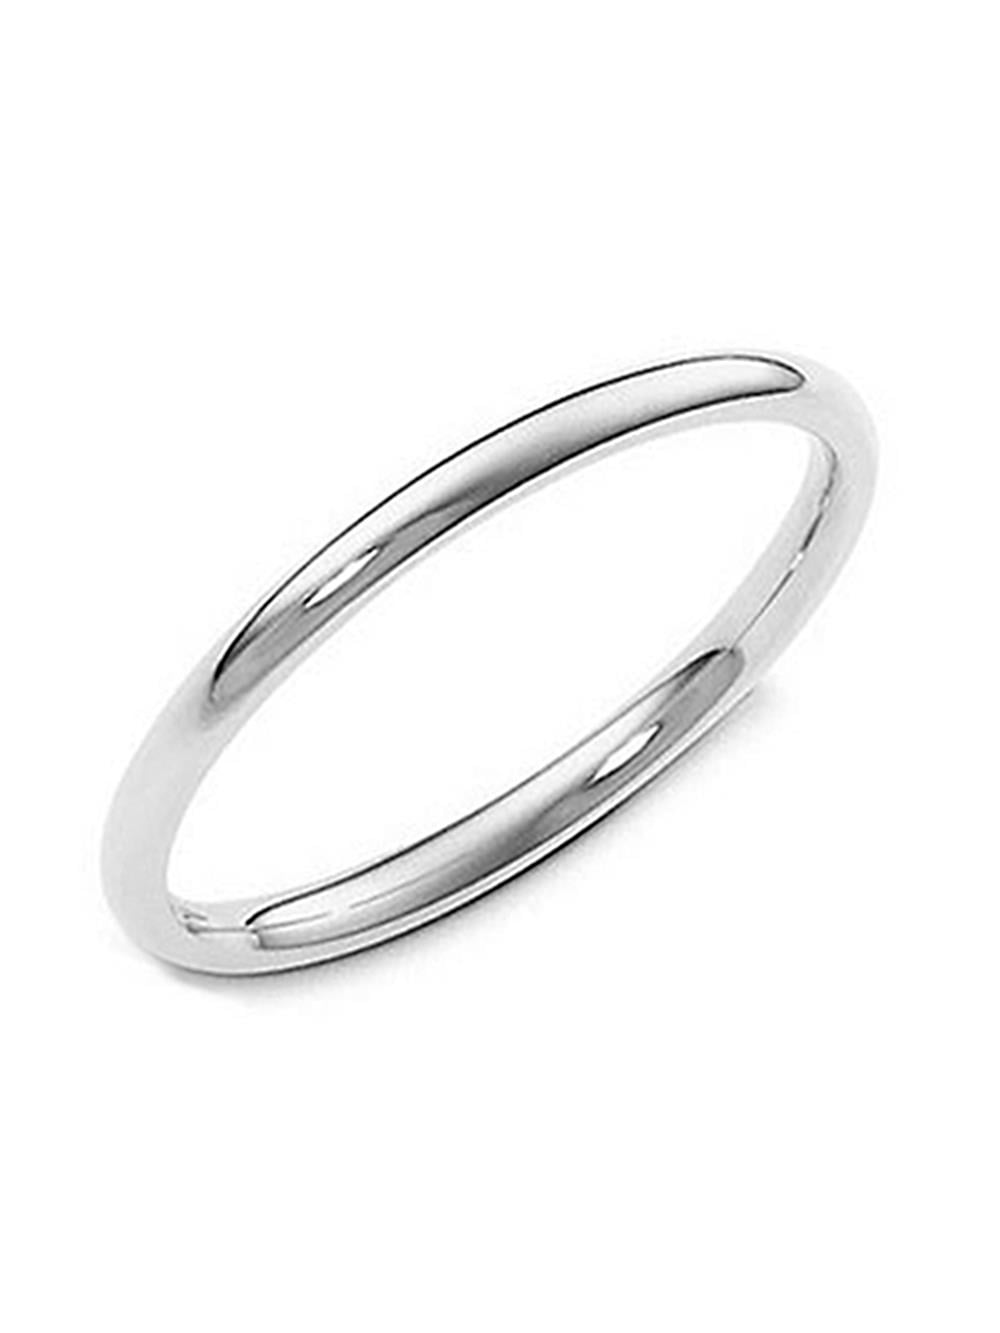 Wedding Bands Classic Bands Domed Bands Sterling Silver 3mm Comfort Fit Band Size 8.5